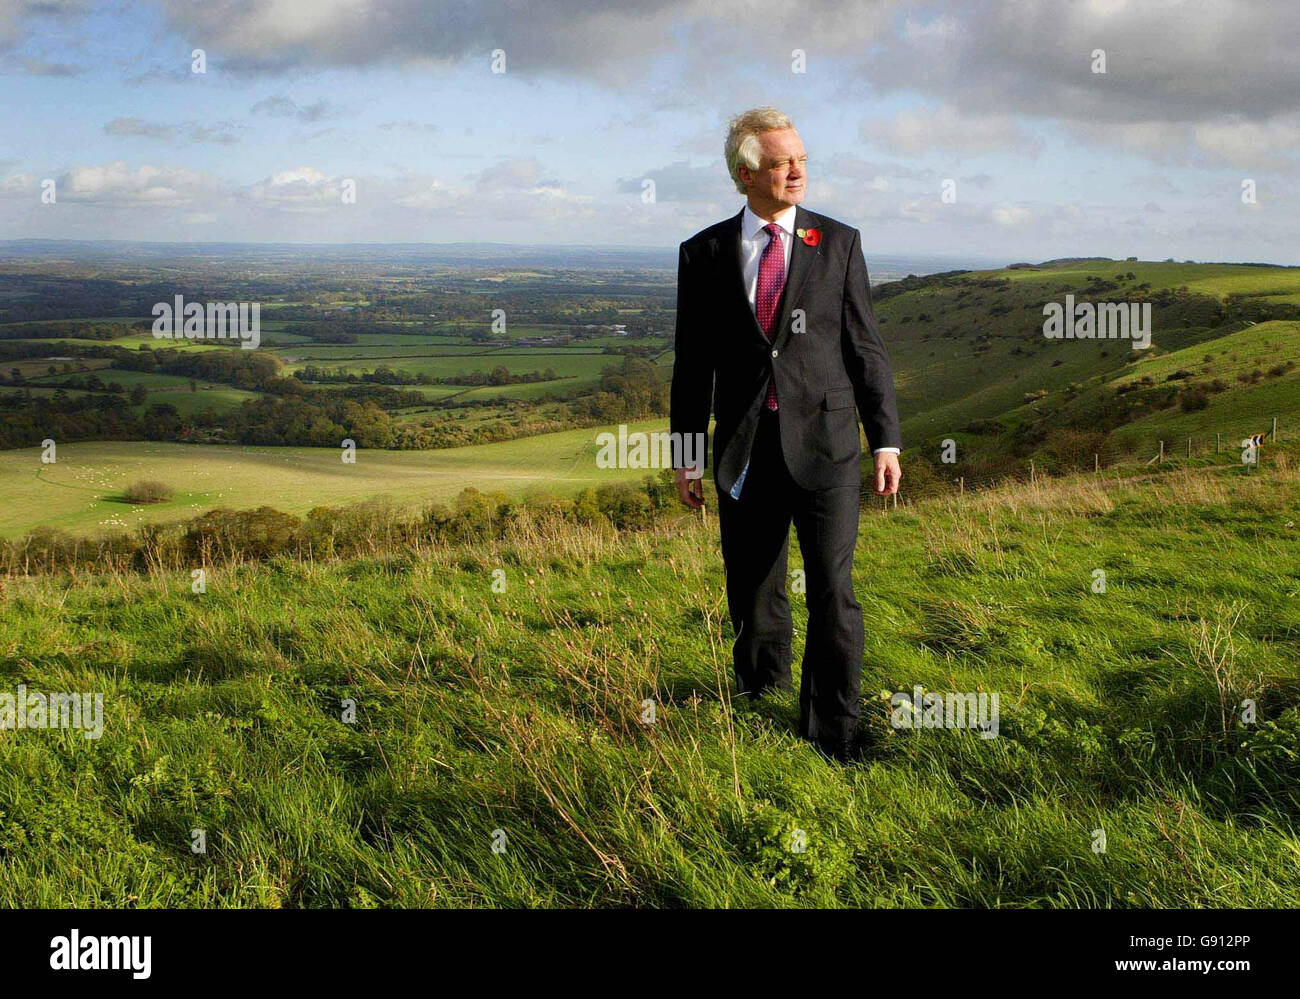 Conservative Party leadership candidate David Davis during a visit to Ditchling in Sussex to view the landscape Stock Photo